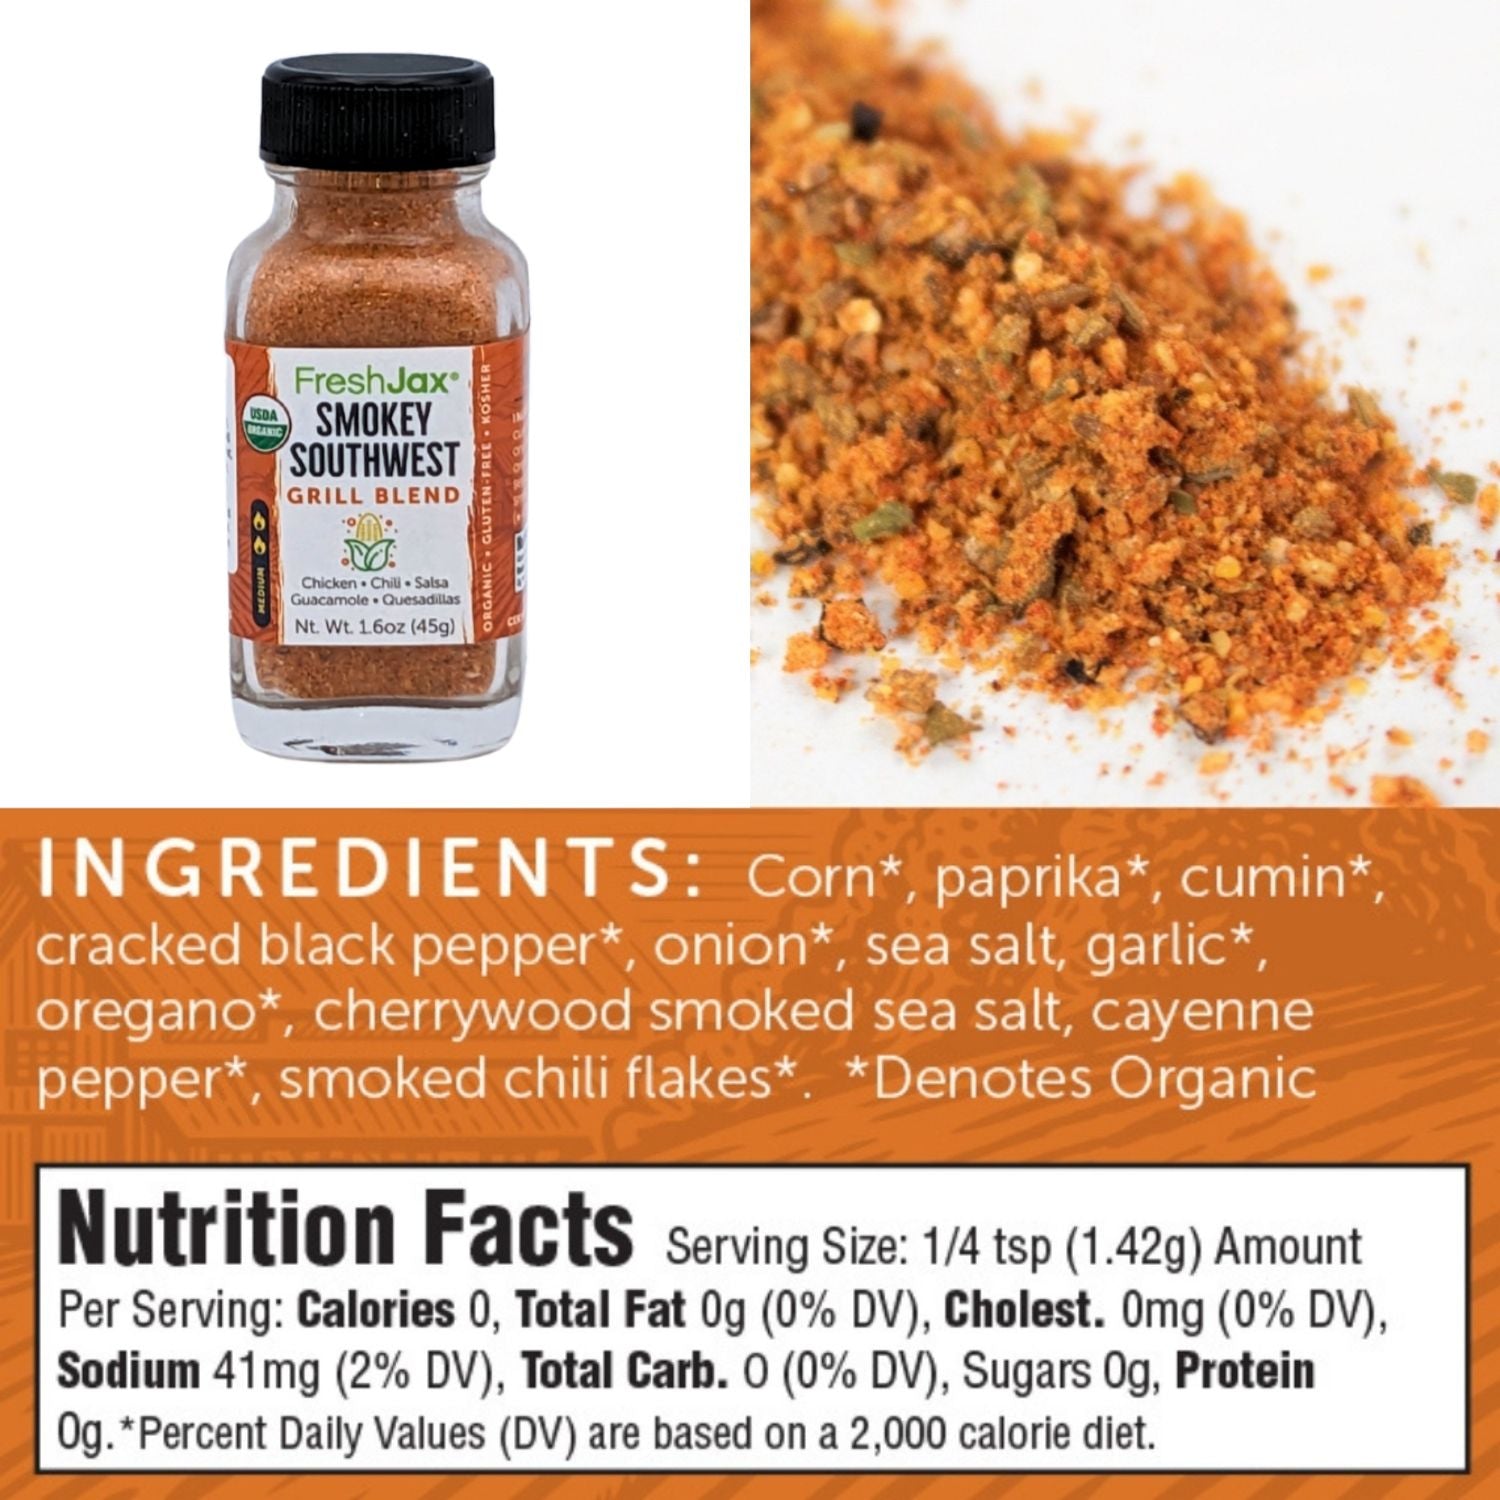 FreshJax Organic Spices Smokey Southwest Grill Blend Nutritional and Ingredient Information